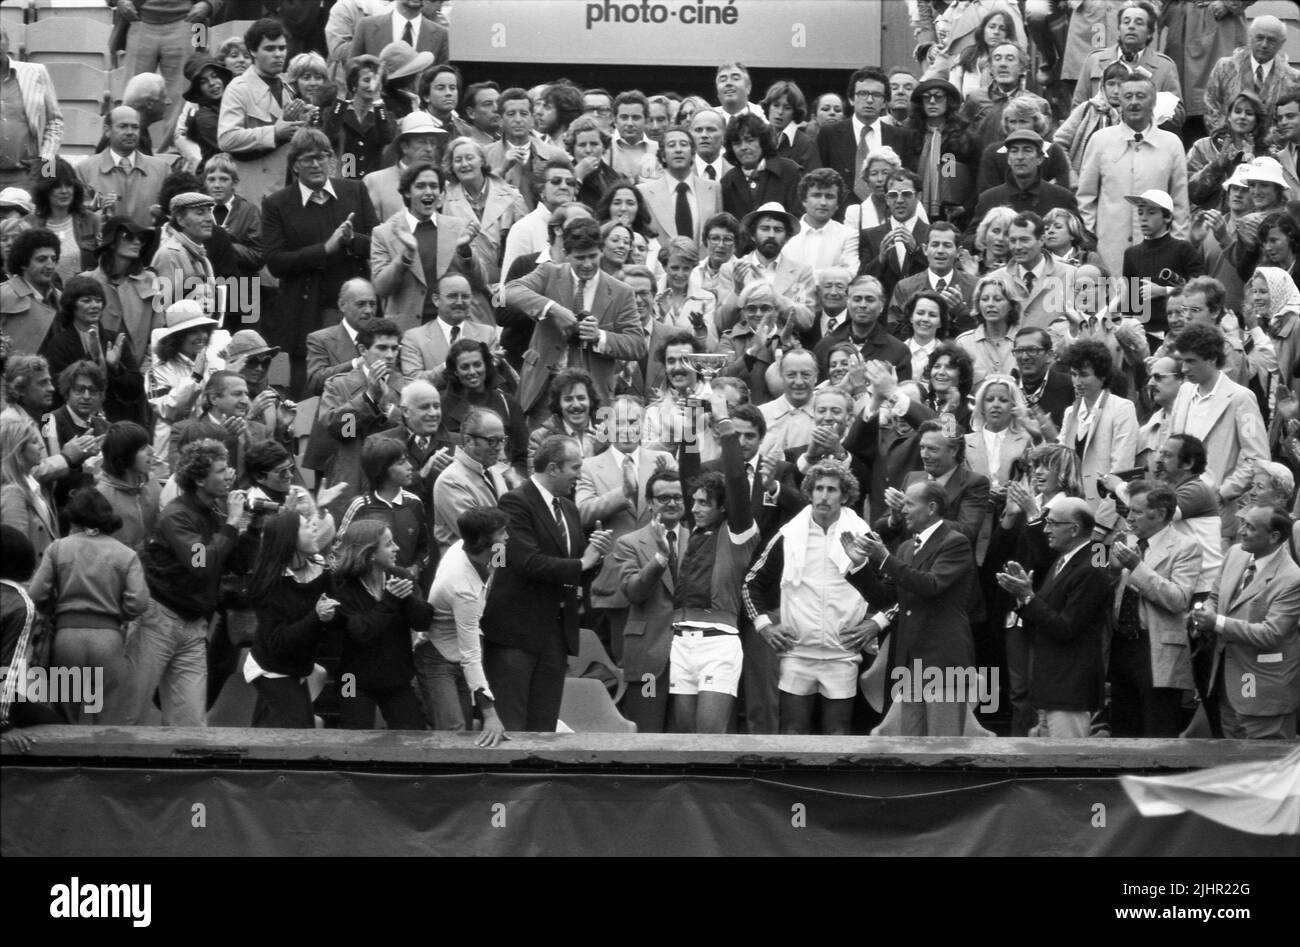 Equadorian tennis player Guillermo Vilas, holding the Coupe des Mousquetaires after having won the men's singles final of the French Open (vs American Brian Gottfried). Paris, Roland-Garros stadium, June 5, 1977 Stock Photo